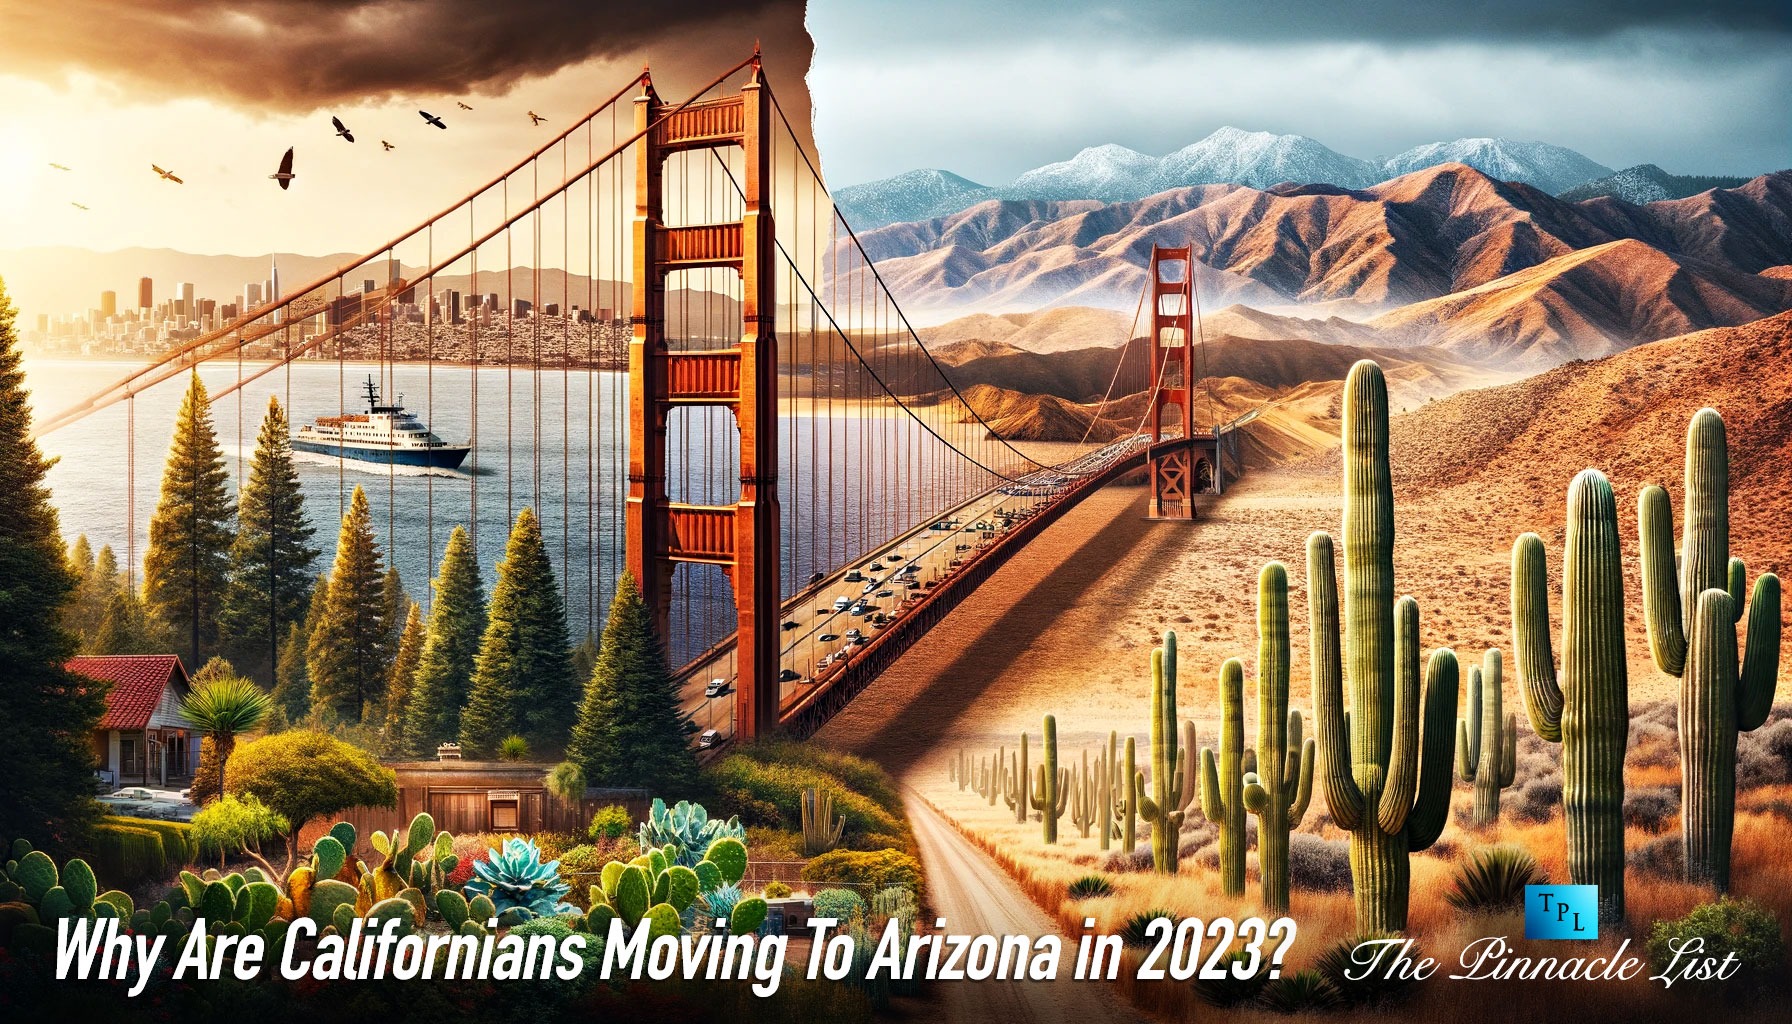 Why Are Californians Moving To Arizona in 2023?